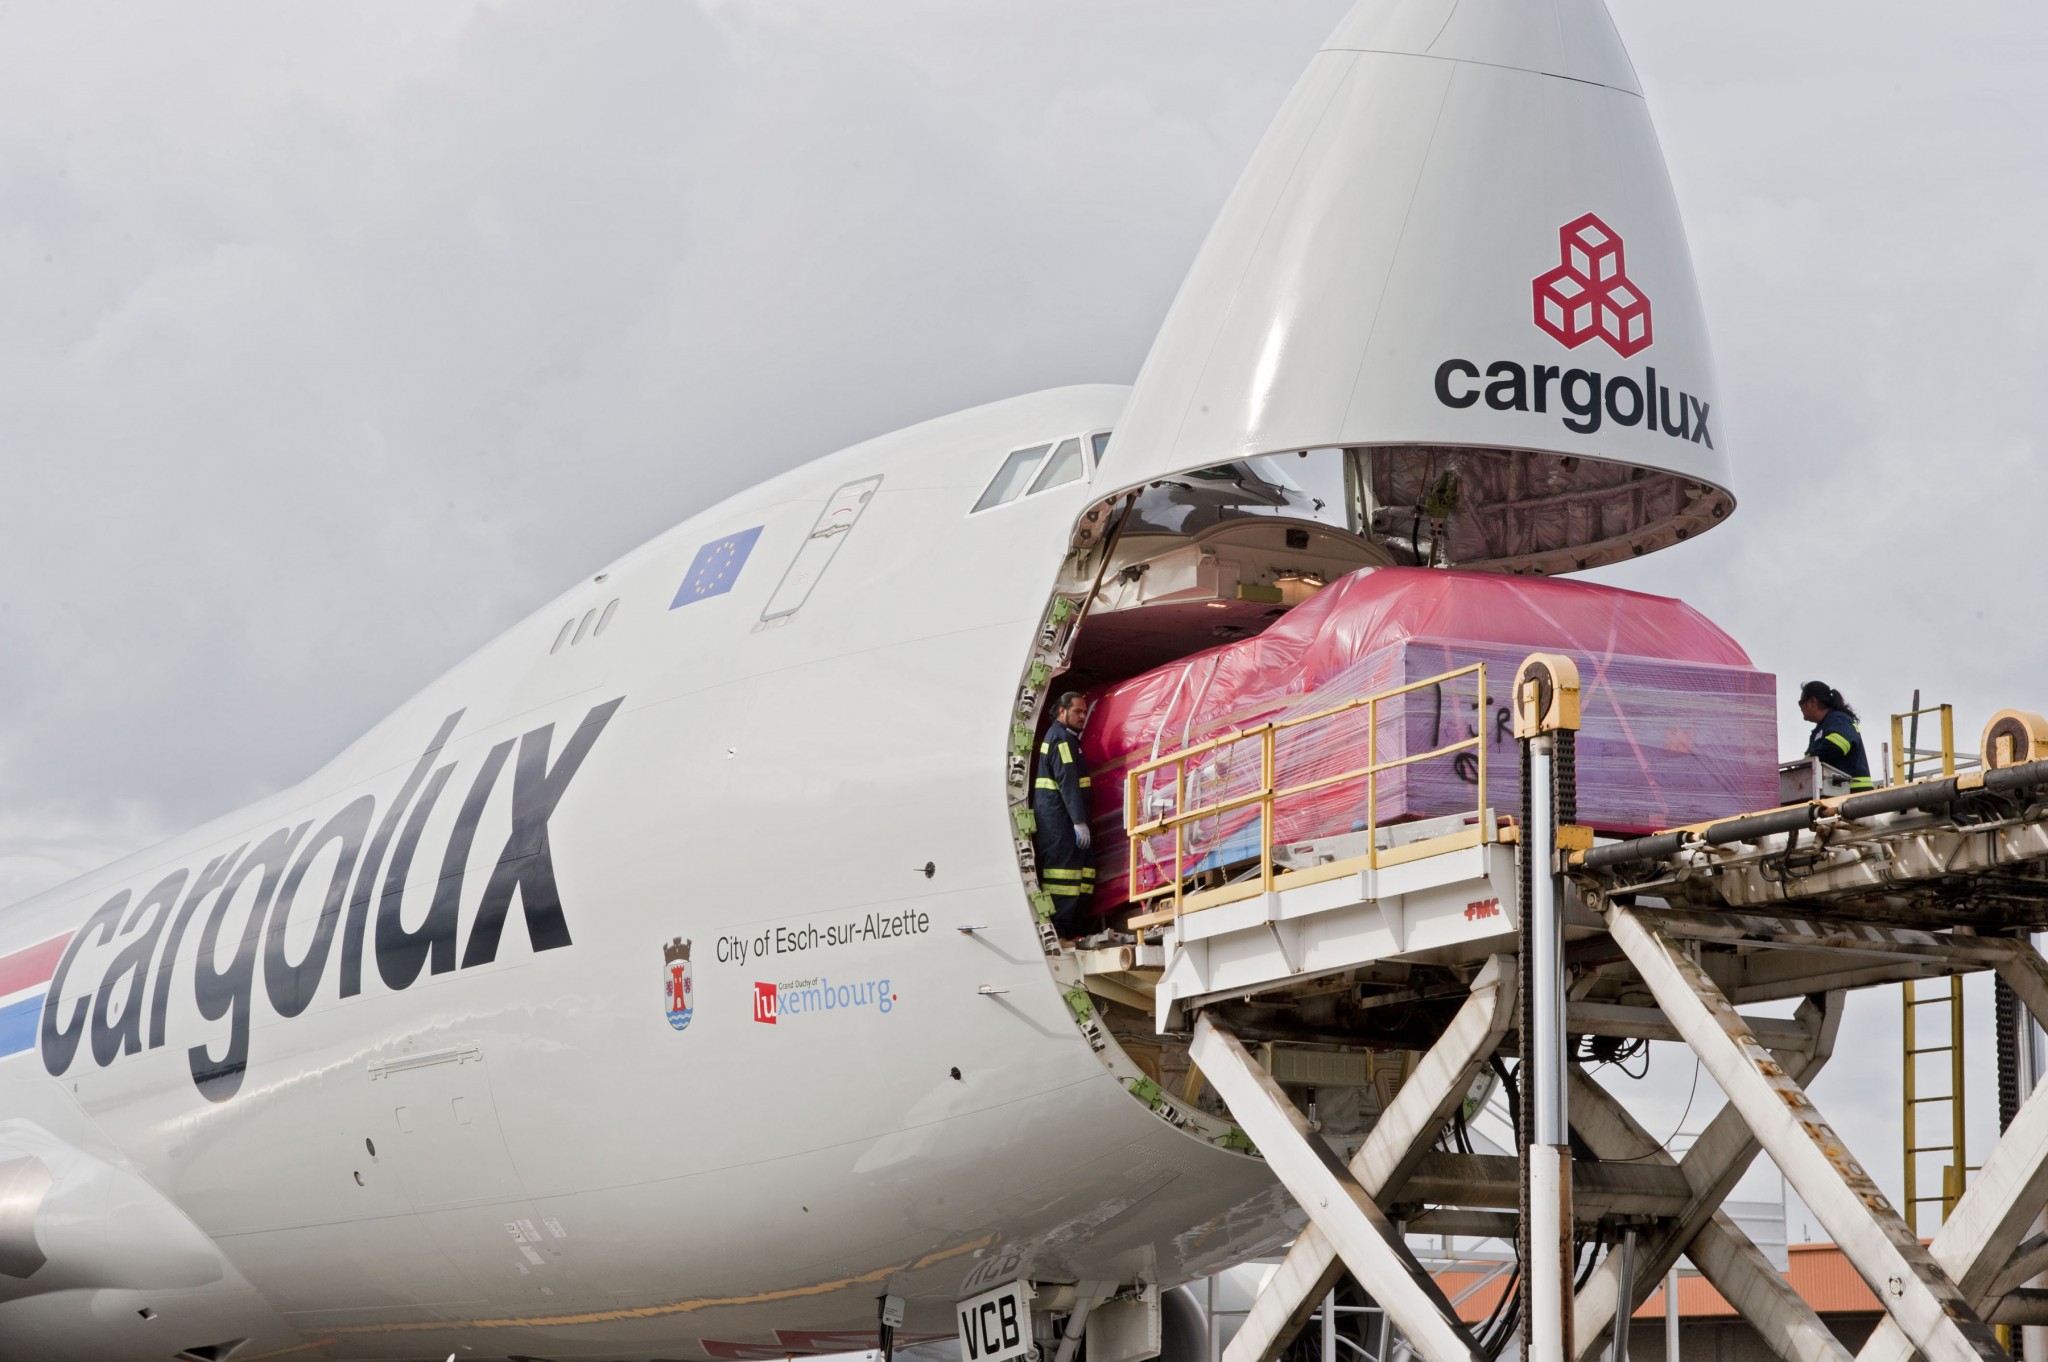 Boeing forecasts air cargo traffic will double in 20 years